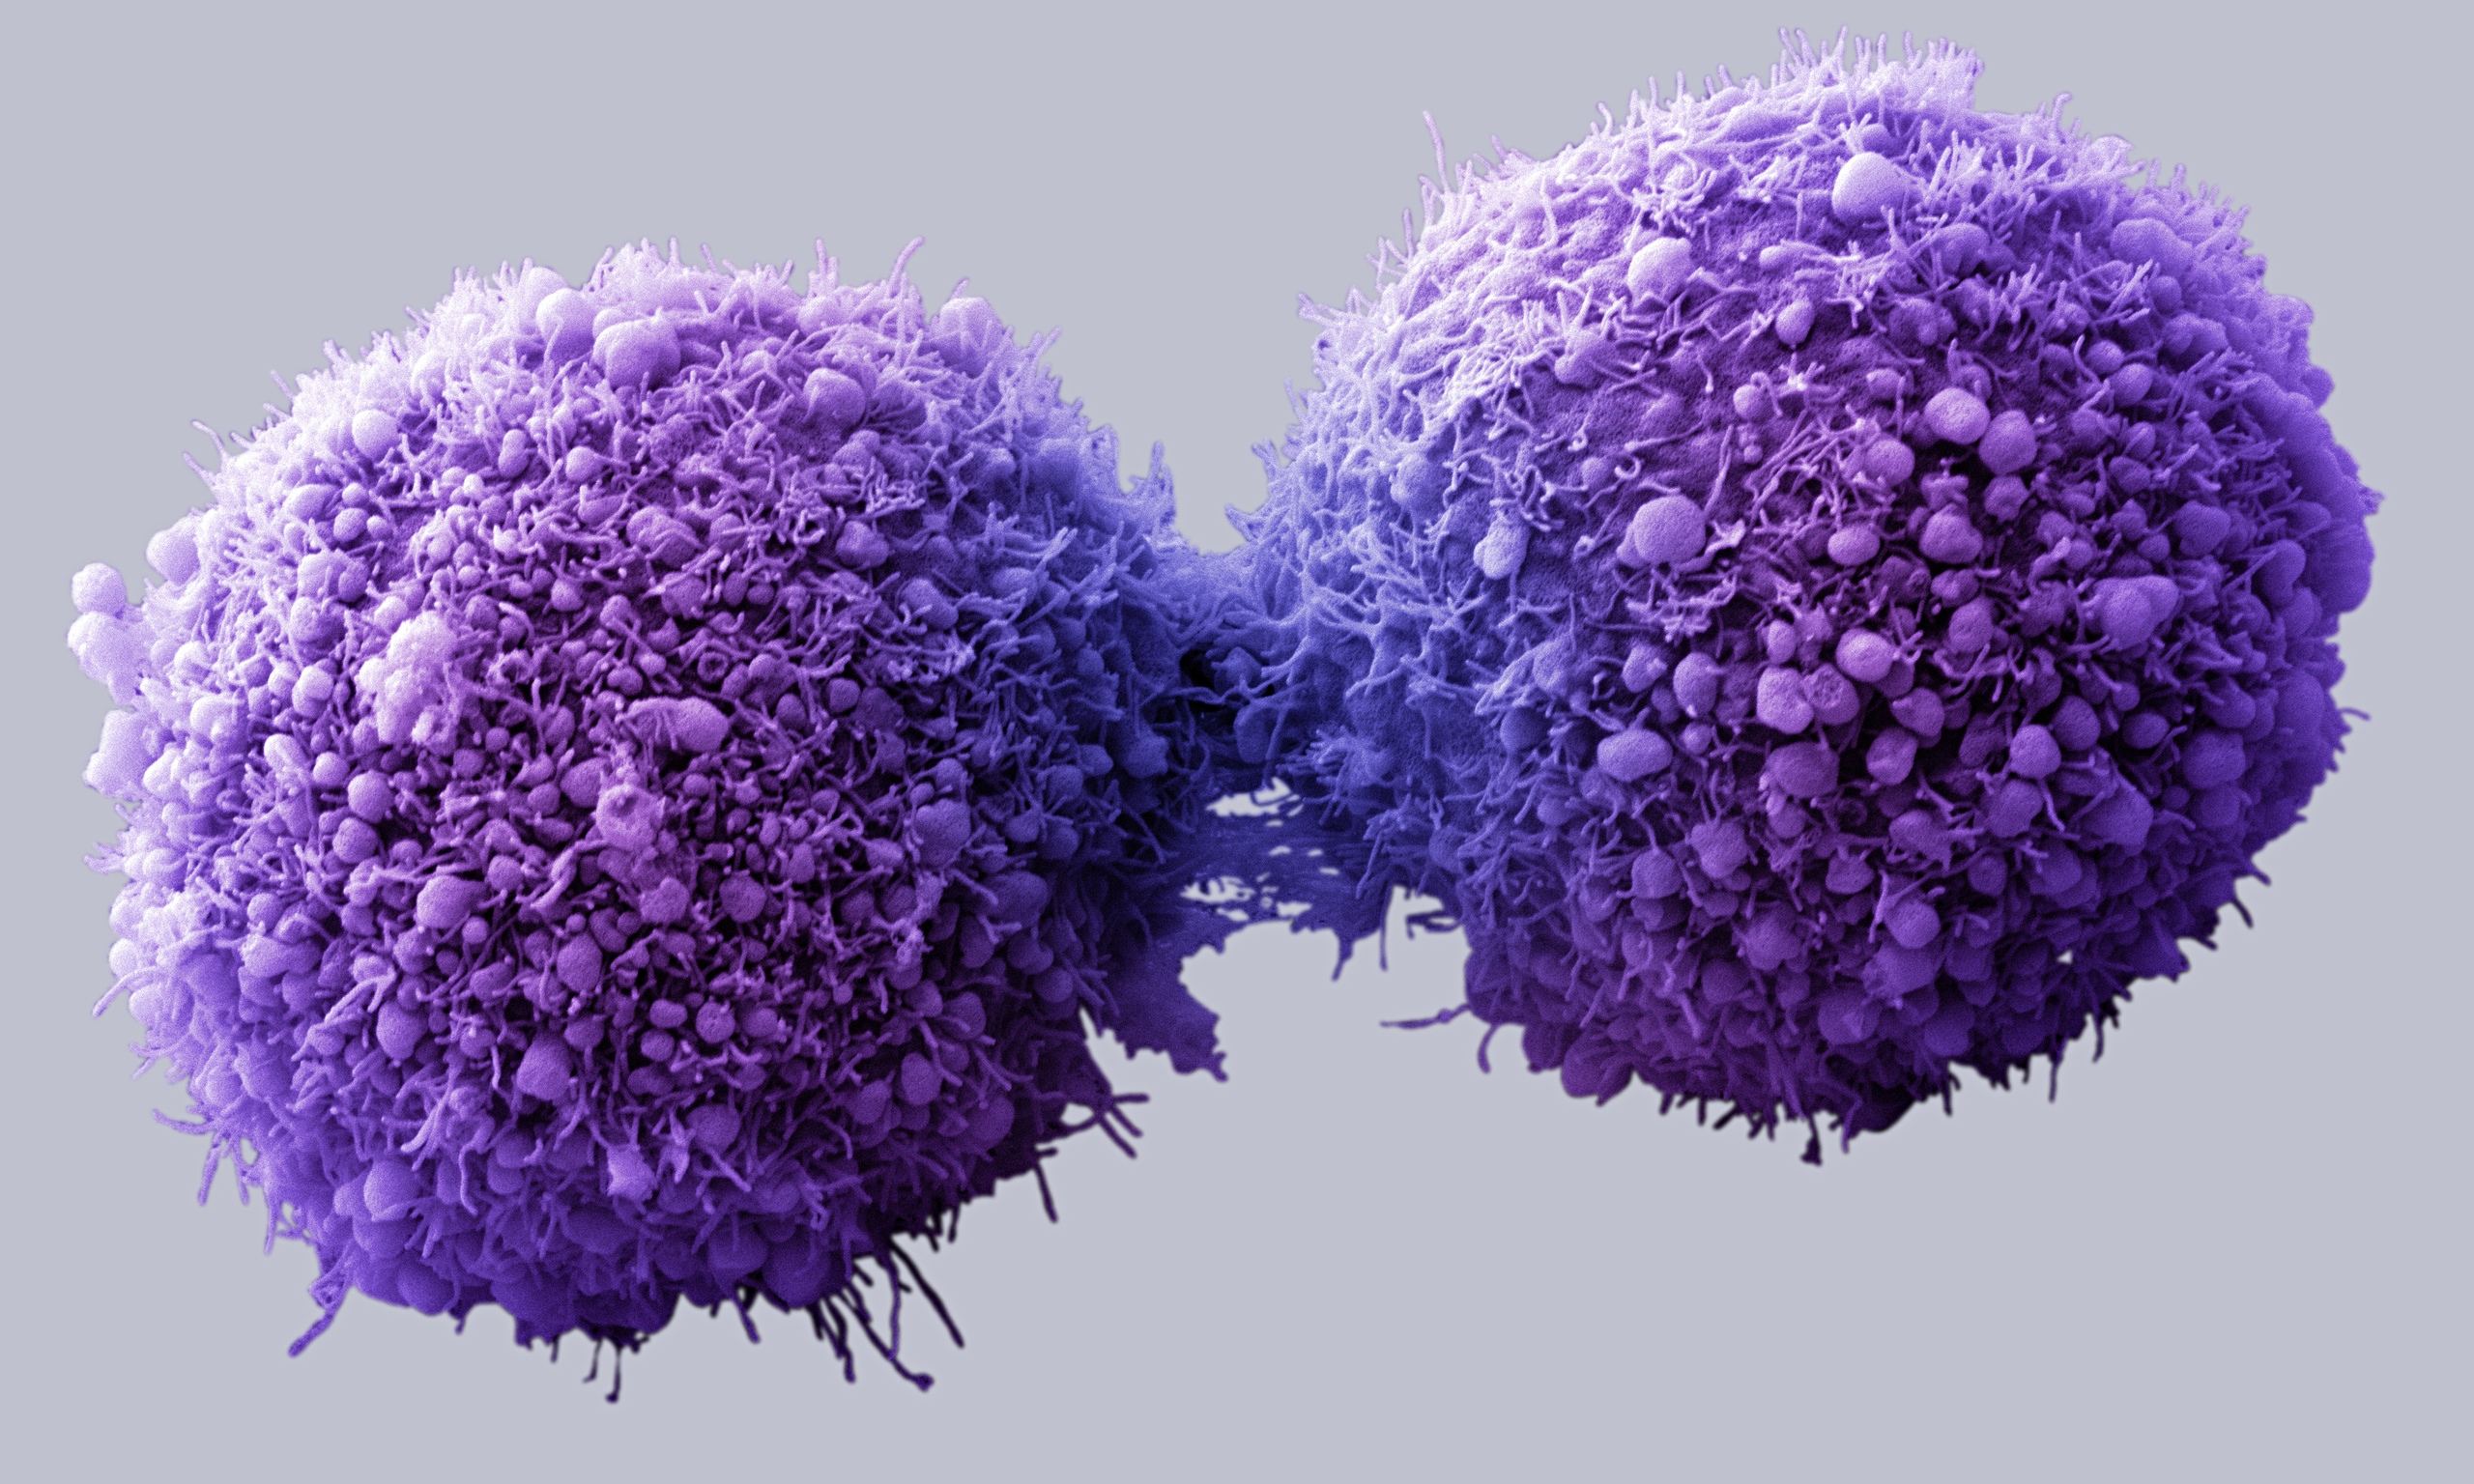 pancreatic-cancer-cells-014